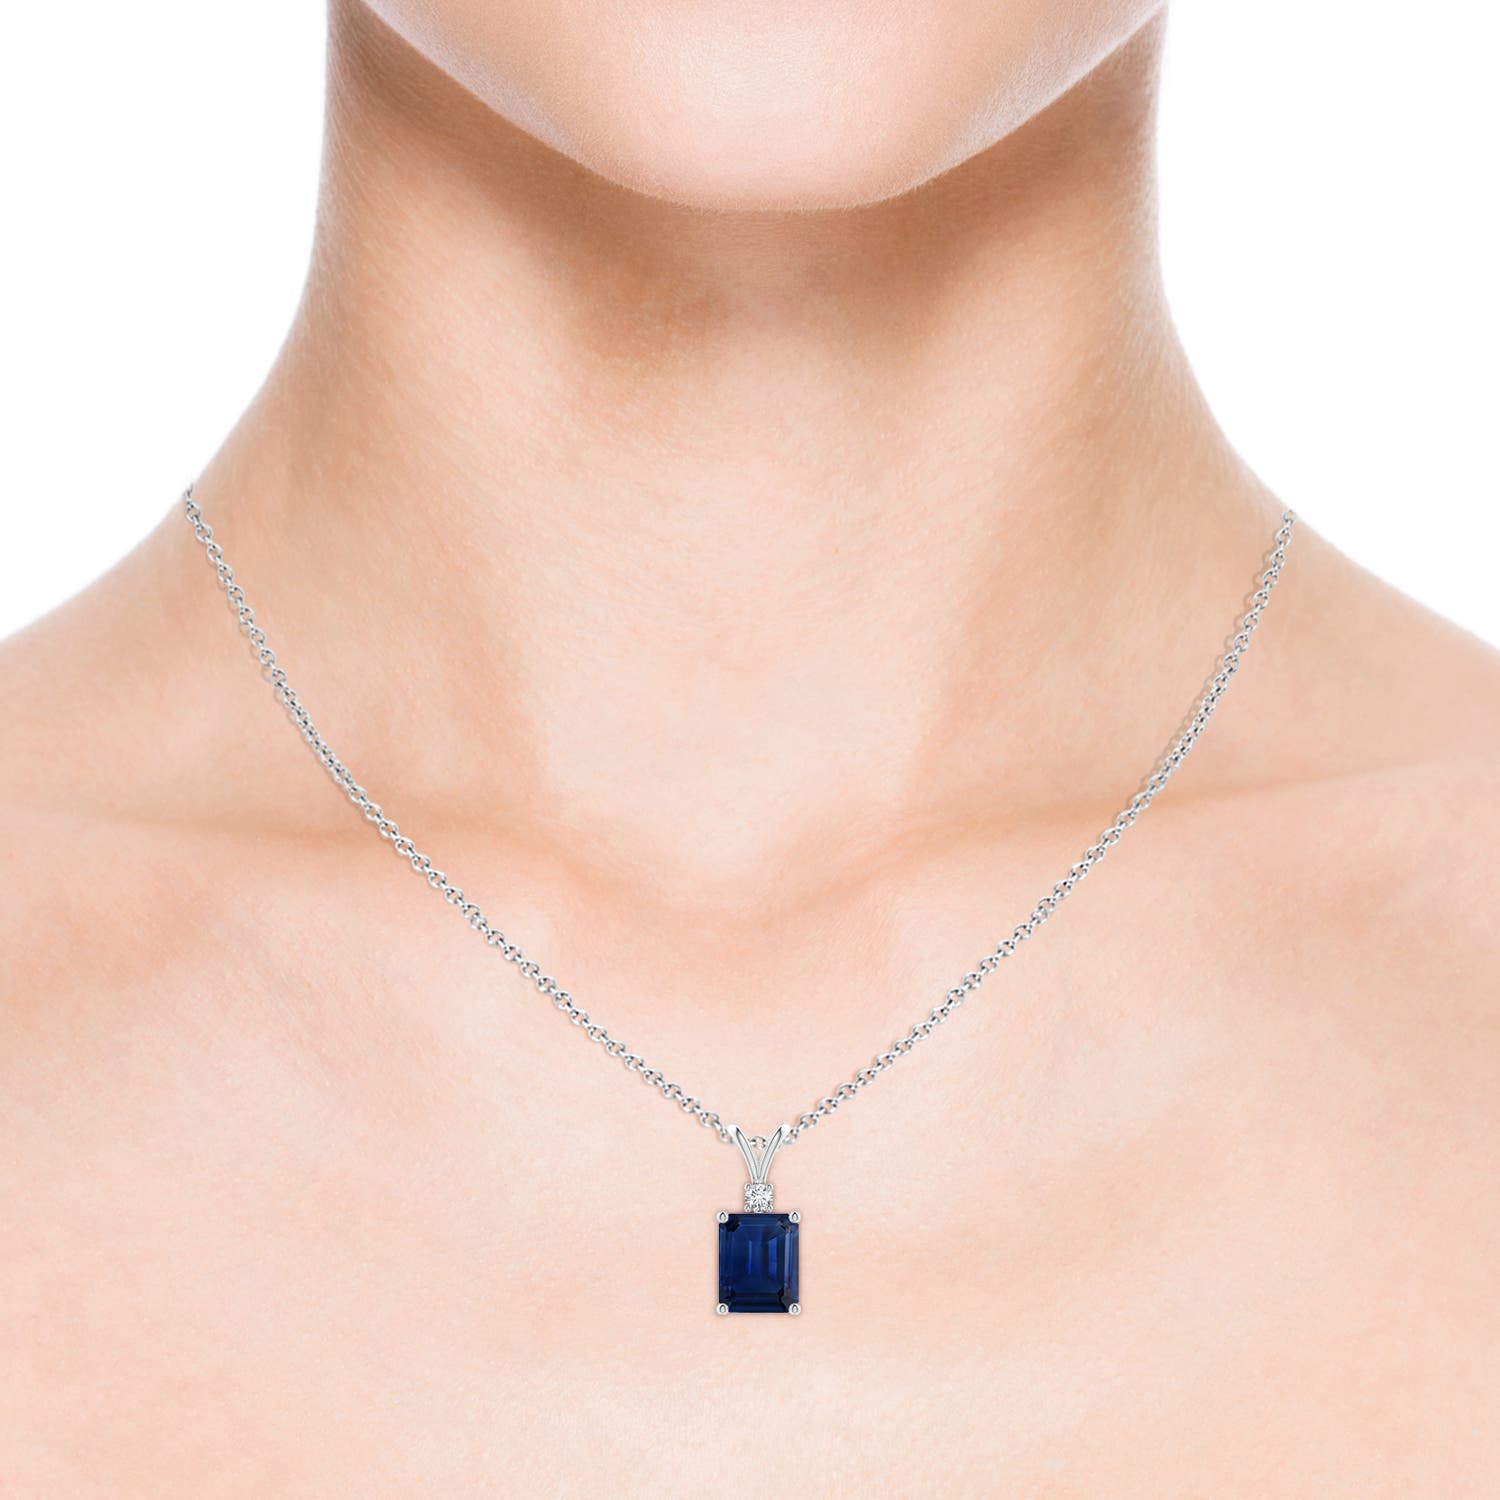 AAA - Blue Sapphire / 3.51 CT / 14 KT White Gold